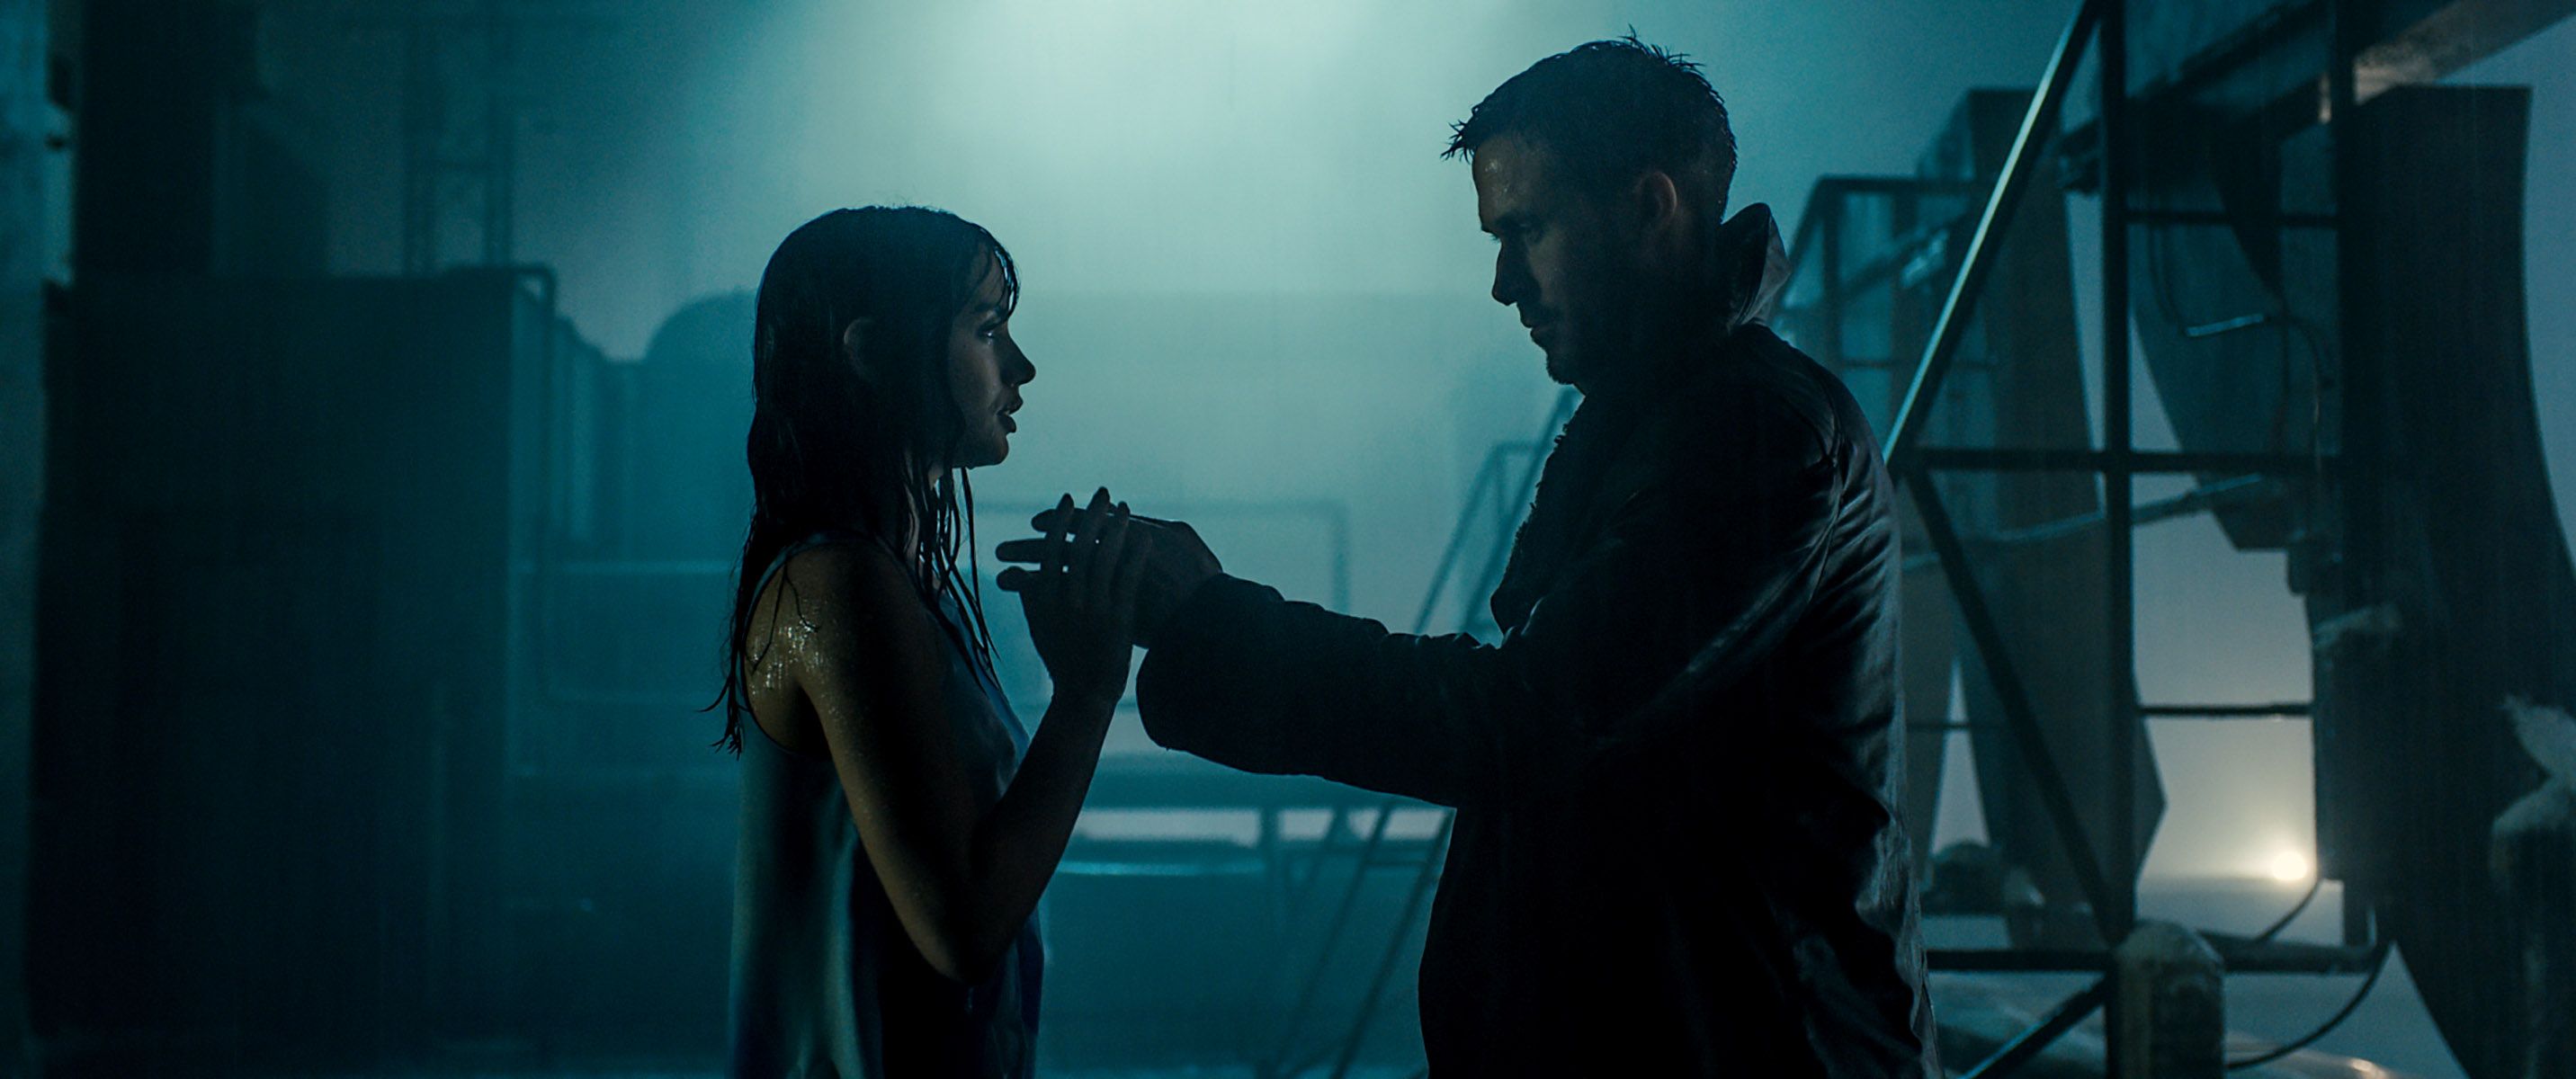 BLADE RUNNER 2049 Director Denis Villeneuve Talks About The Four Hour Cut Of His Movie